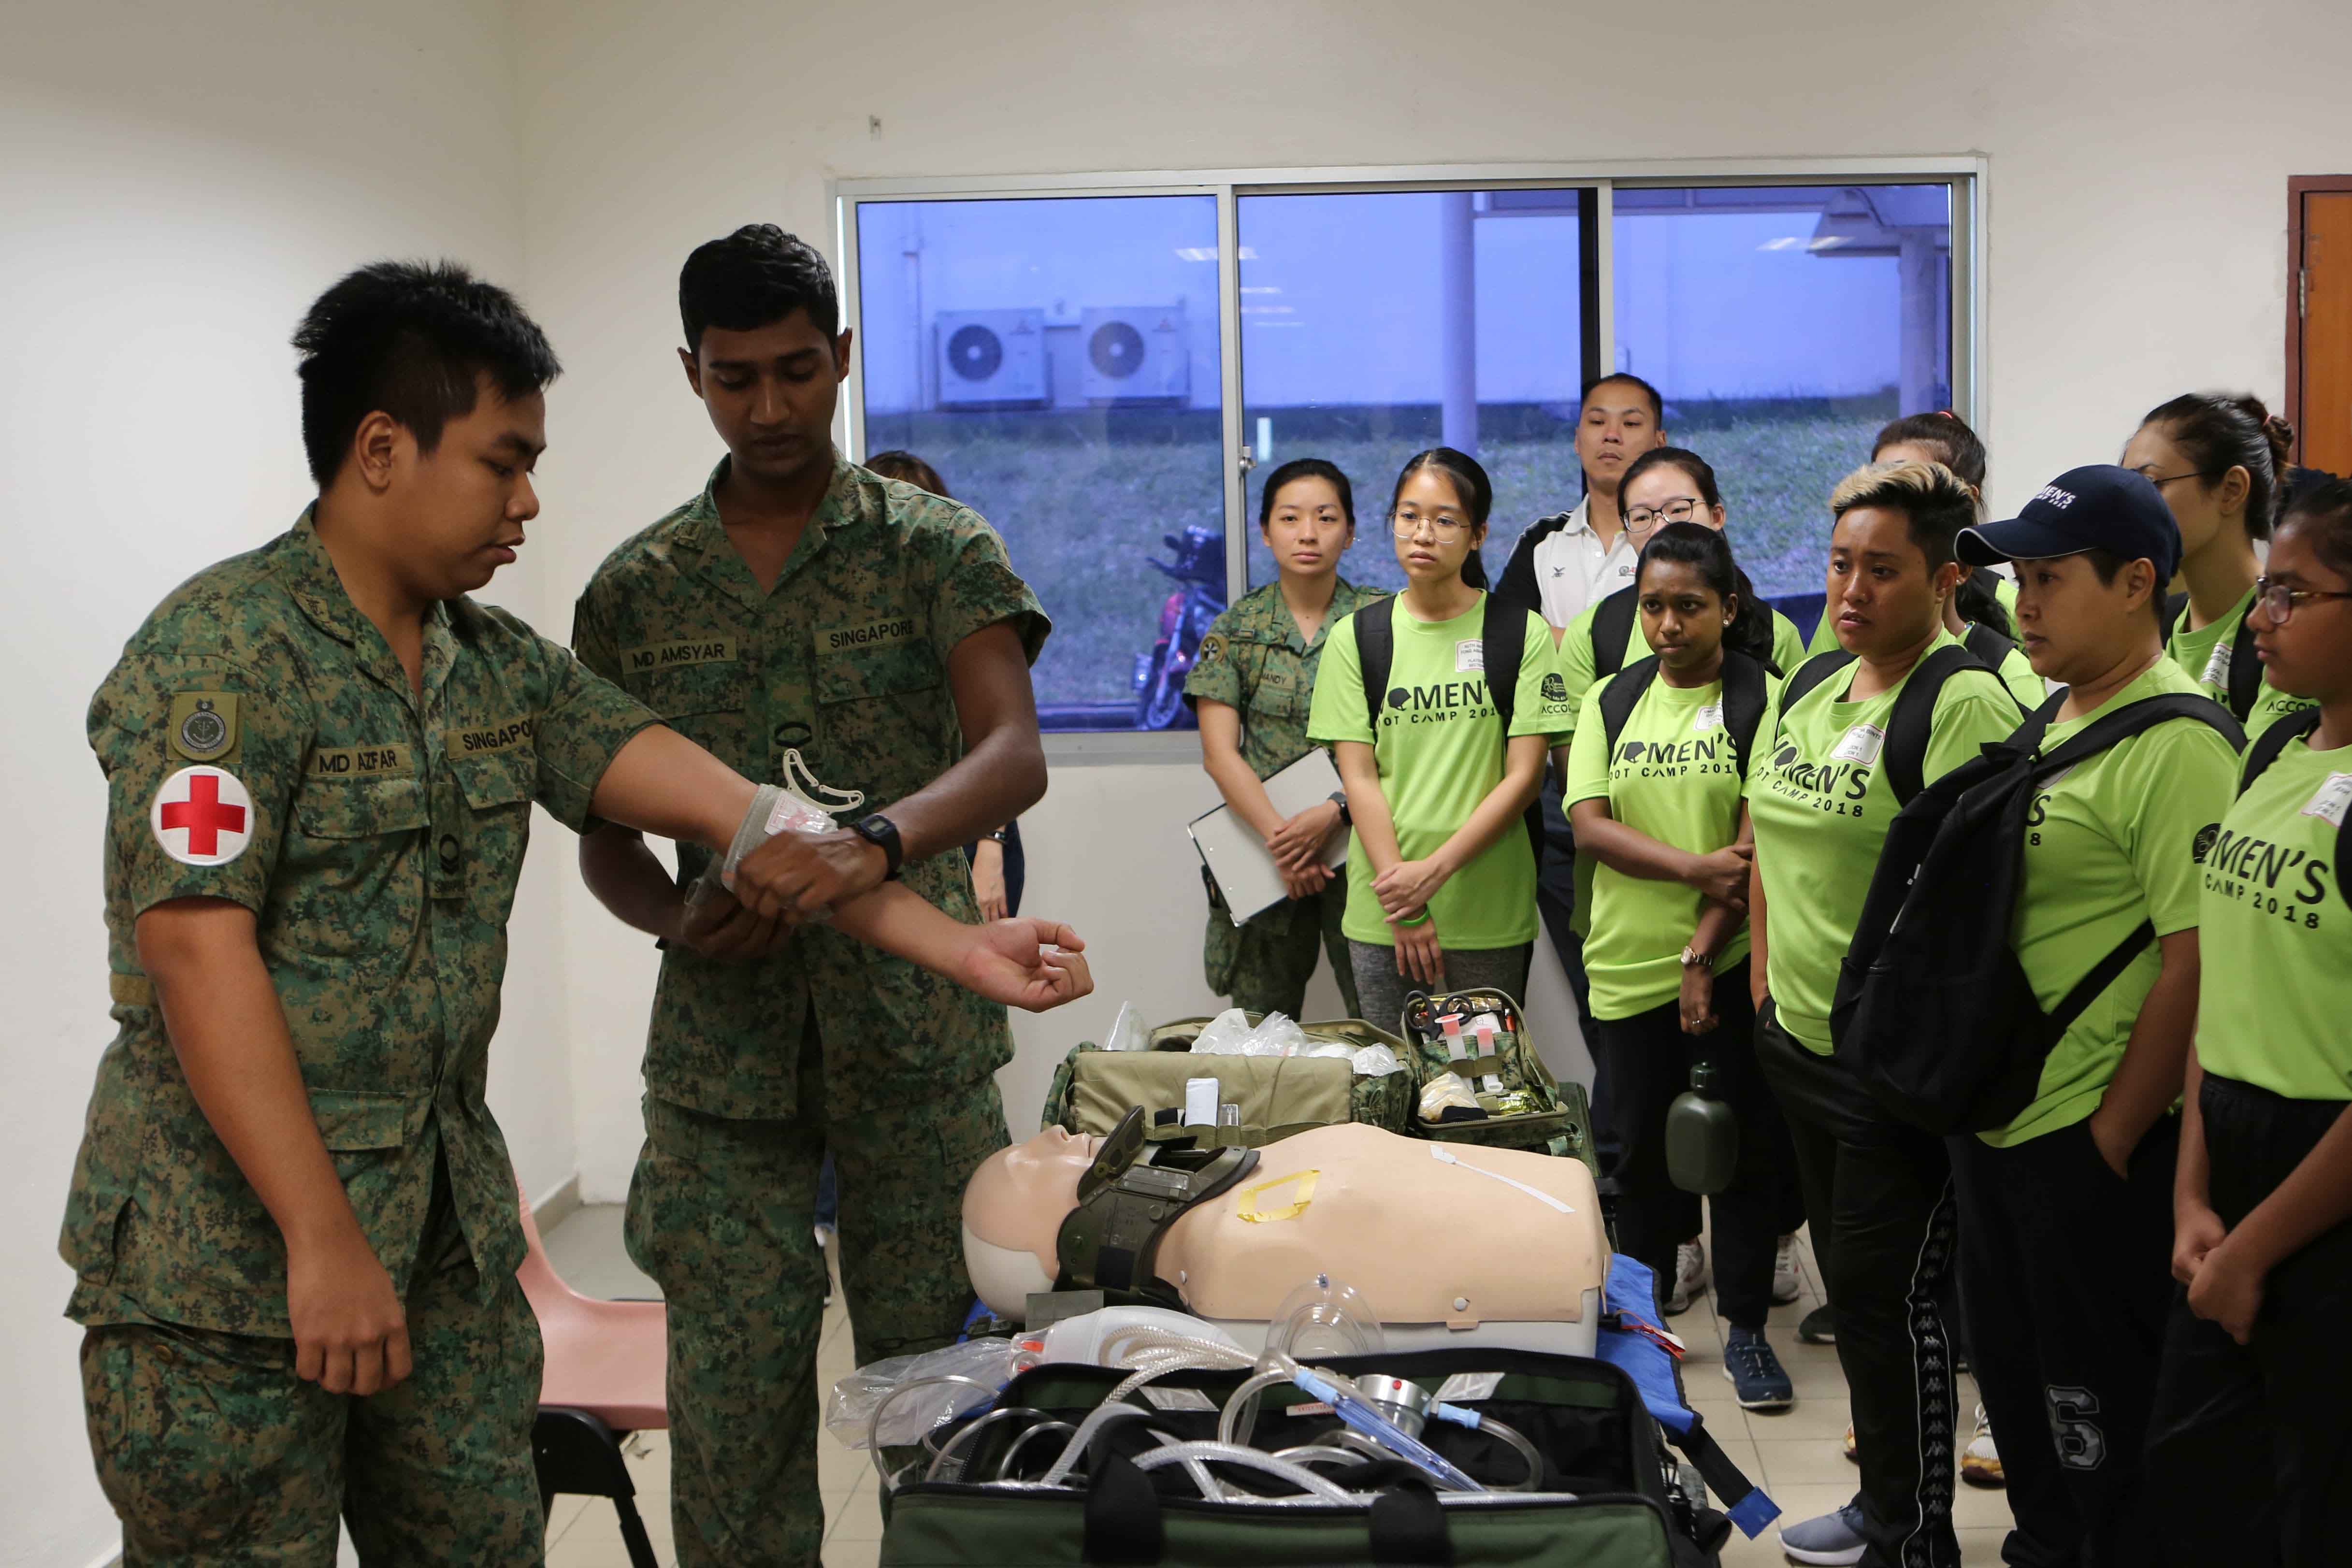 Participants being introduced to the equipment used by our medics.